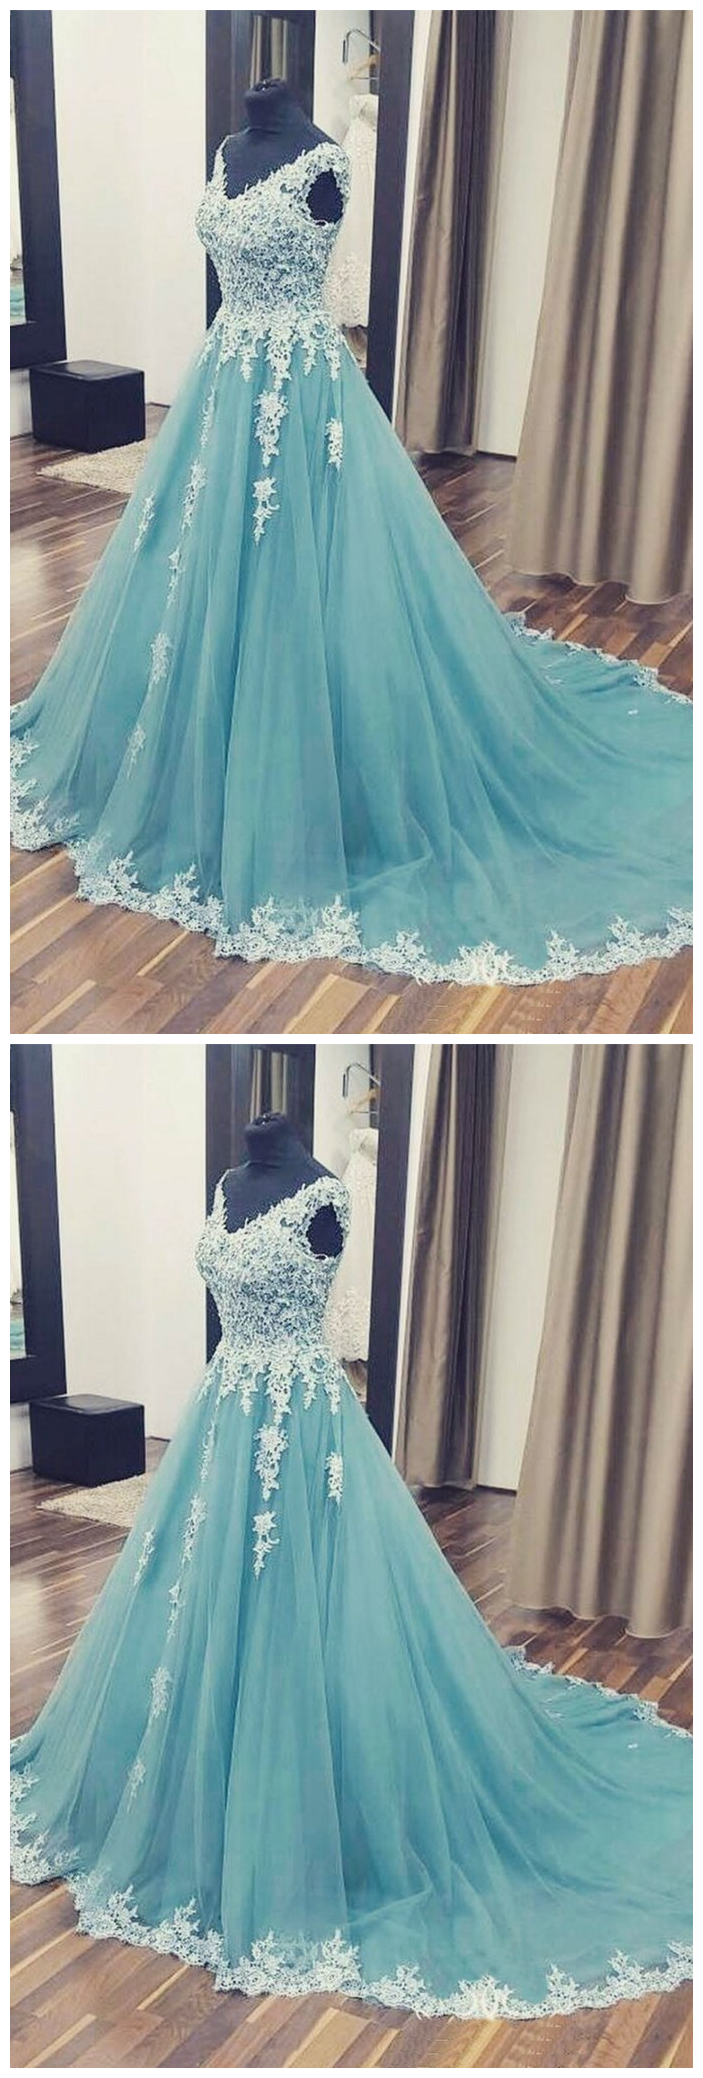 Appliques Tulle Prom Dress, Sexy Sleeveless Prom Dresses, Long Ball Gowns, Formal Evening Dress